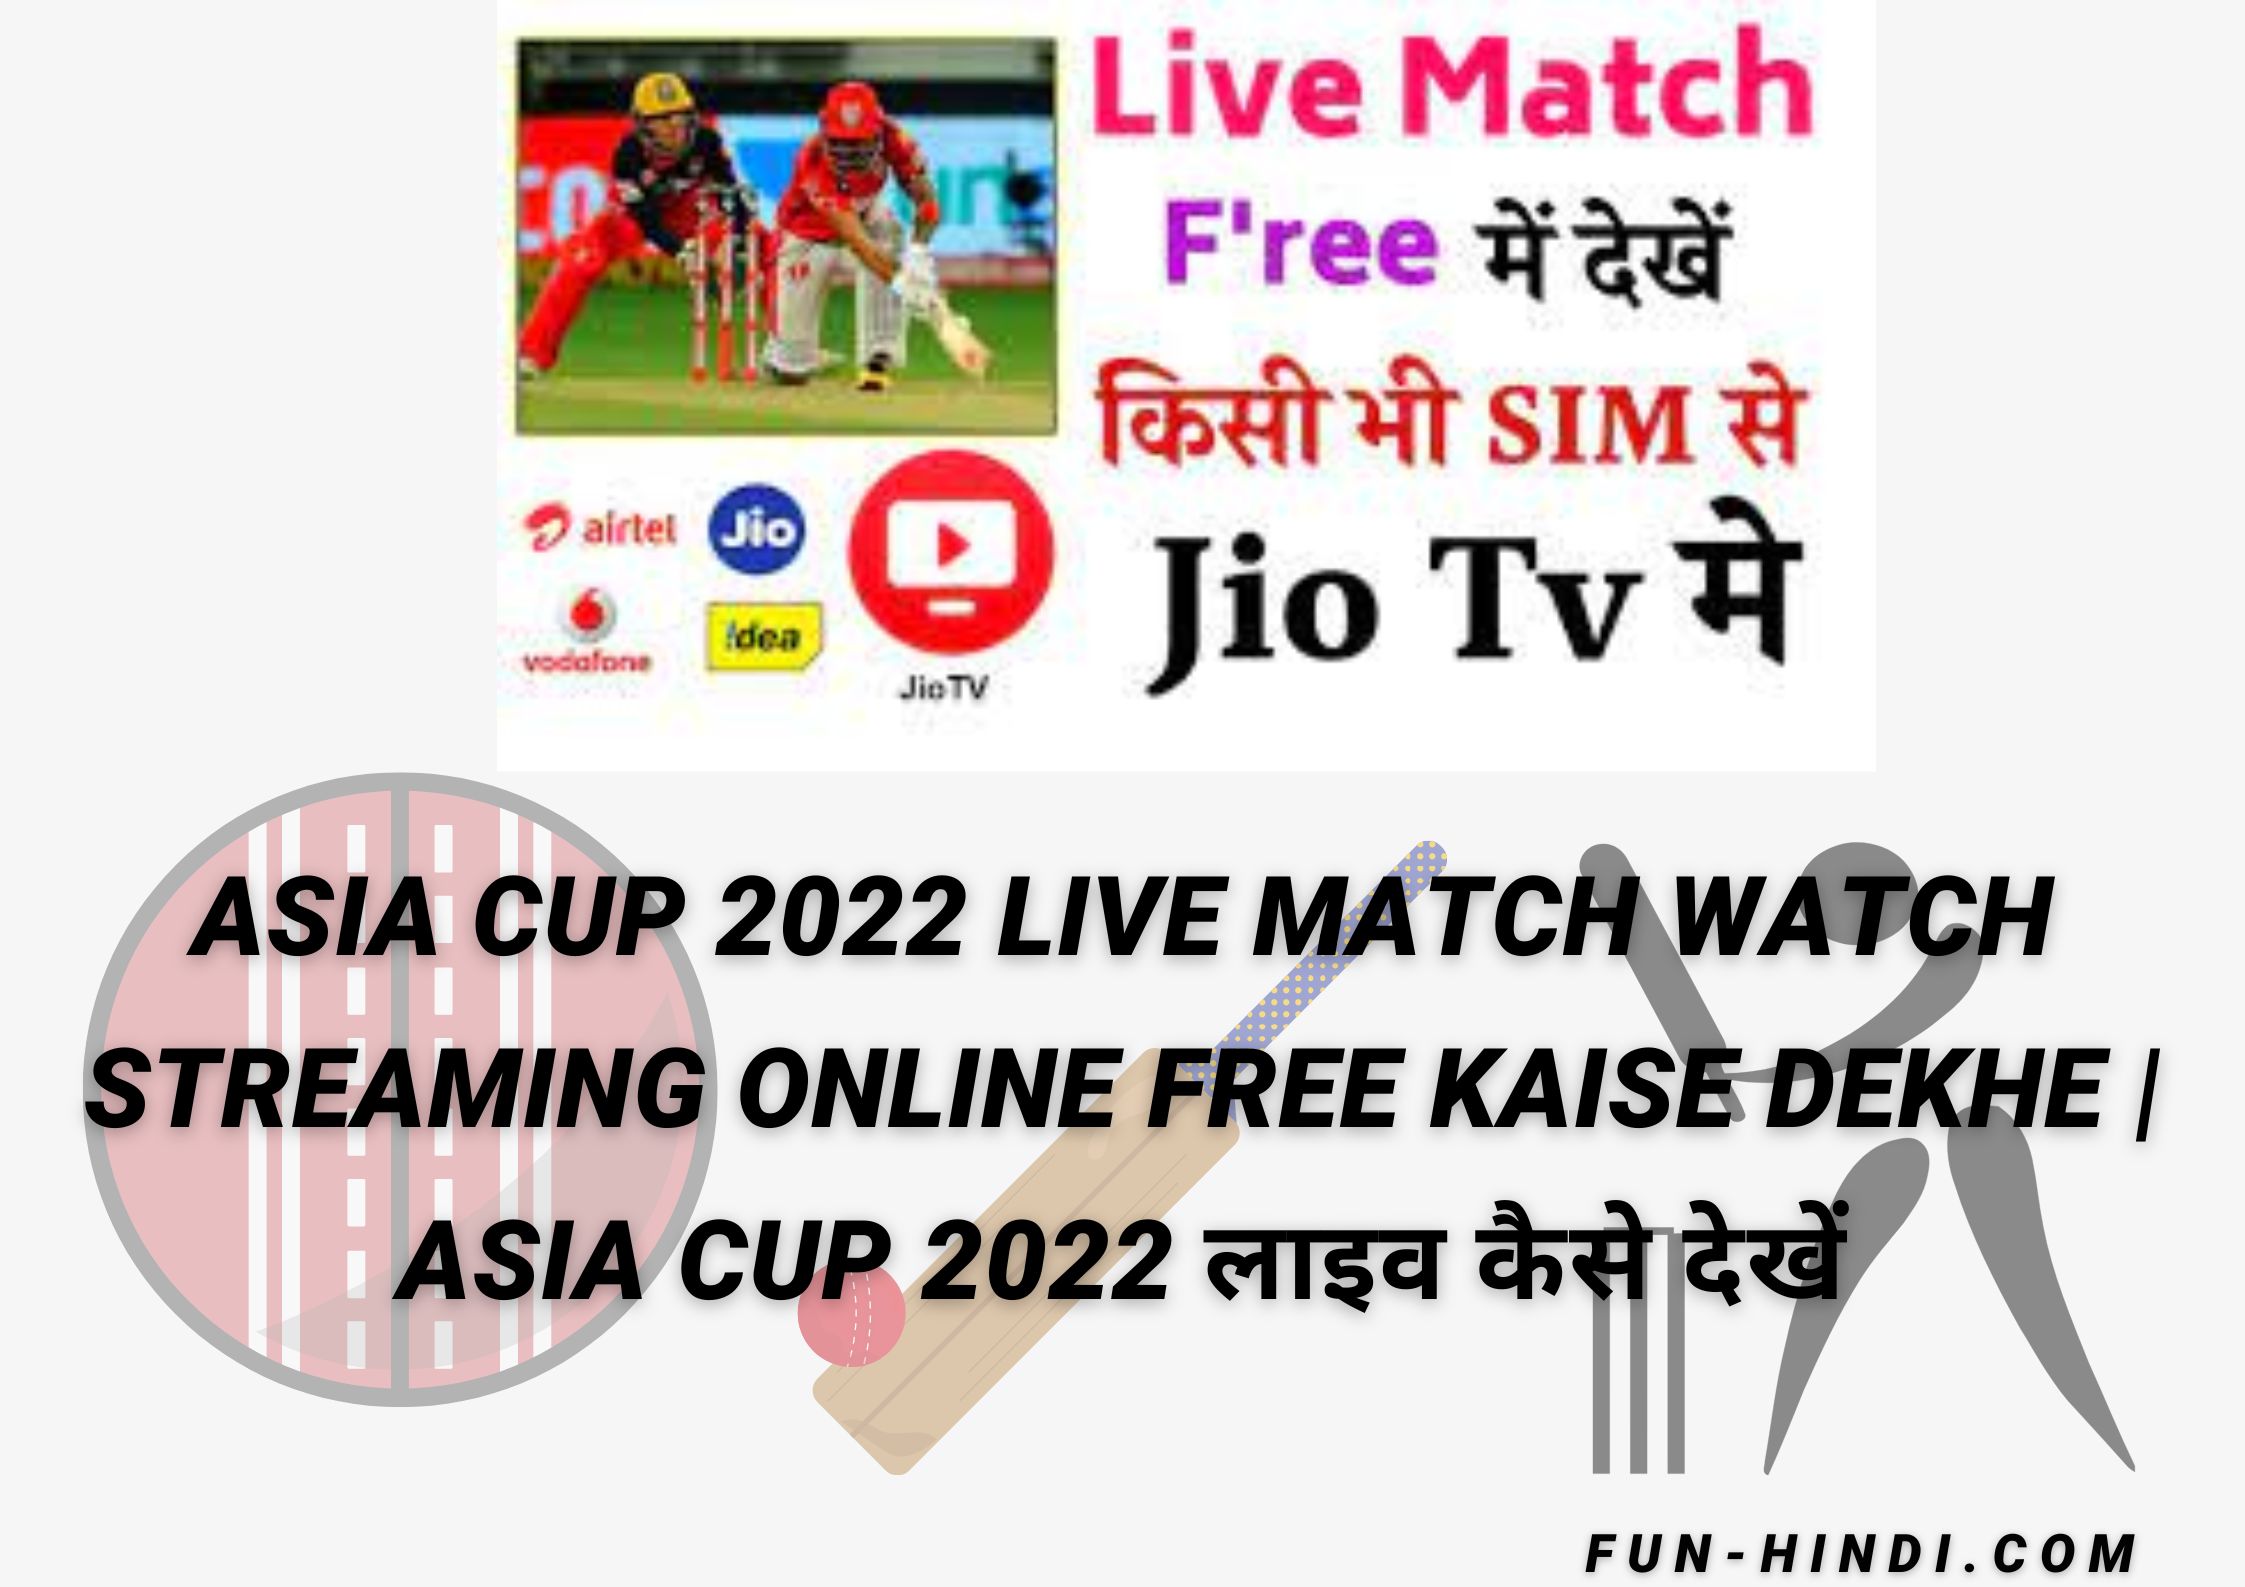 Asia Cup 2022 Live Match Watch Streaming Online Free